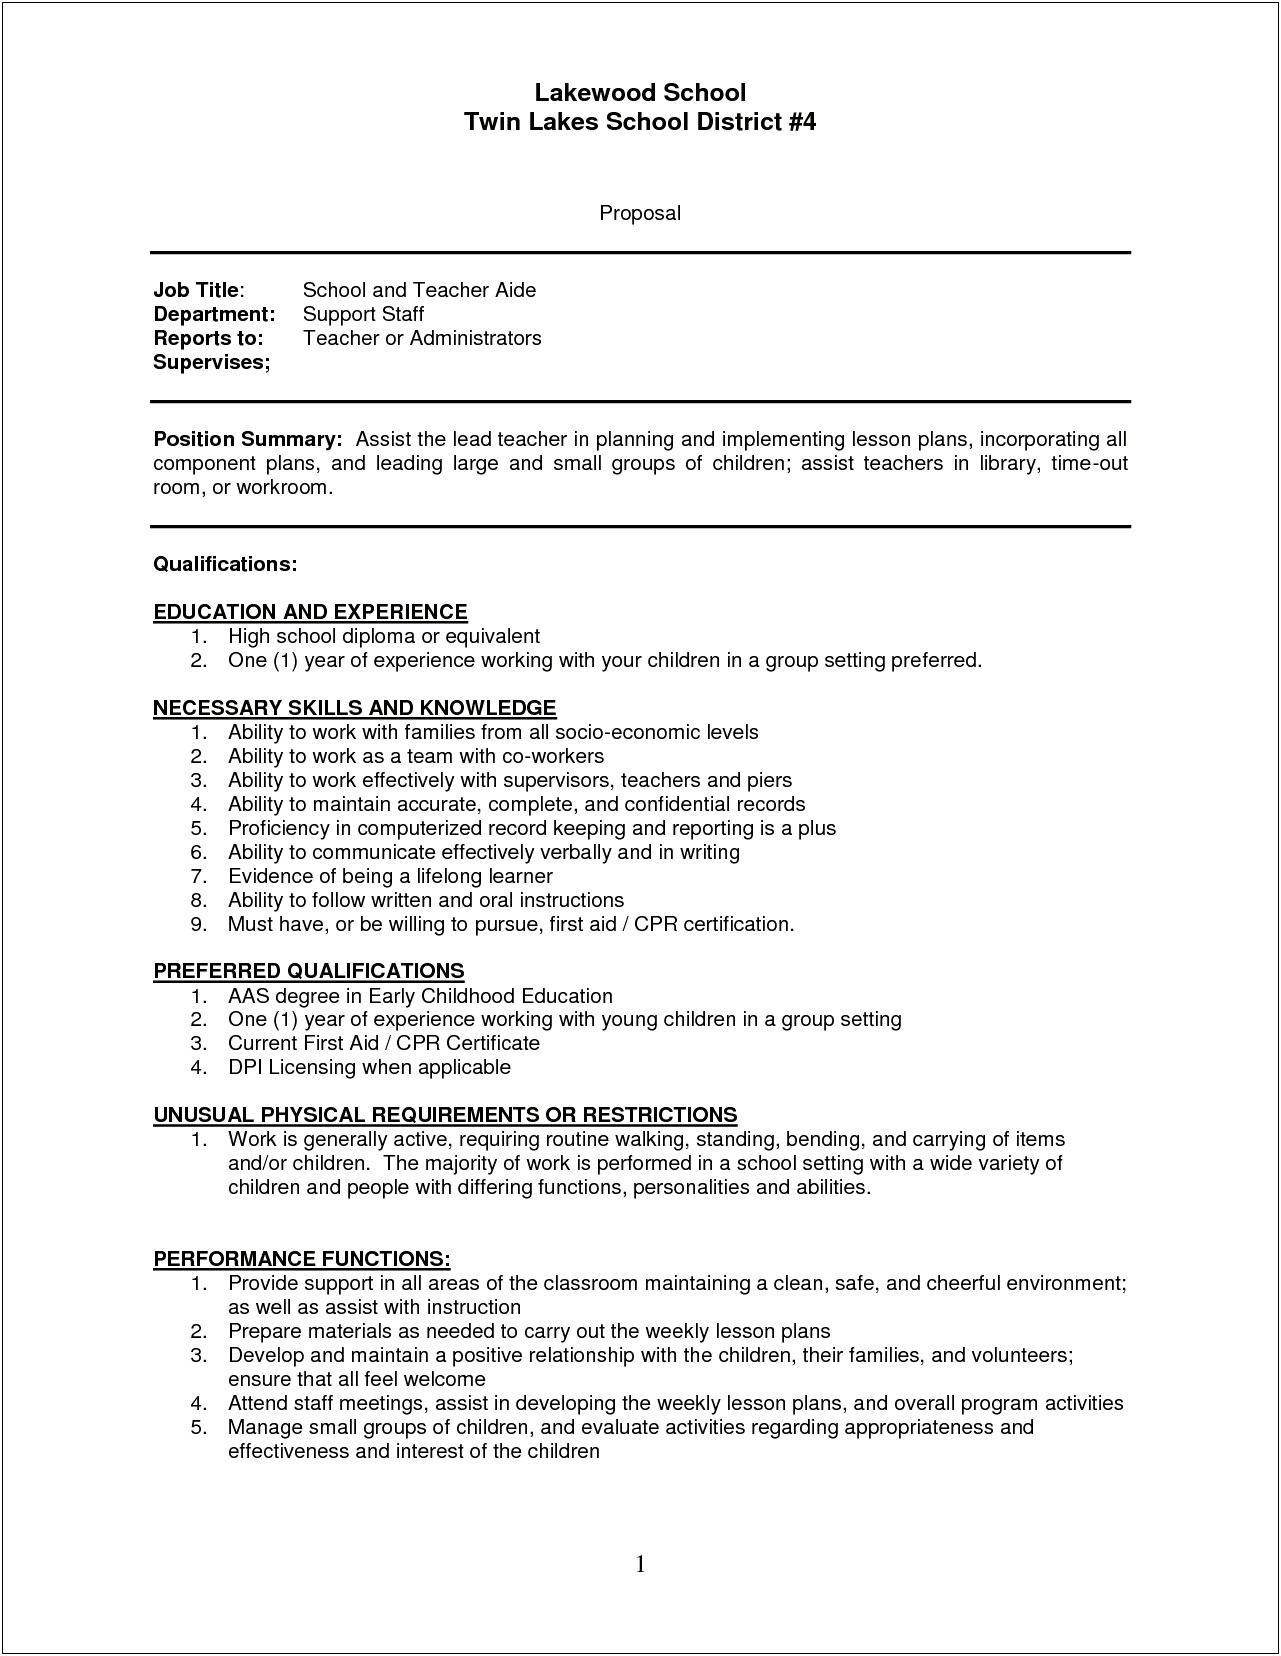 Example Of Resume For Early Childhood Teacher